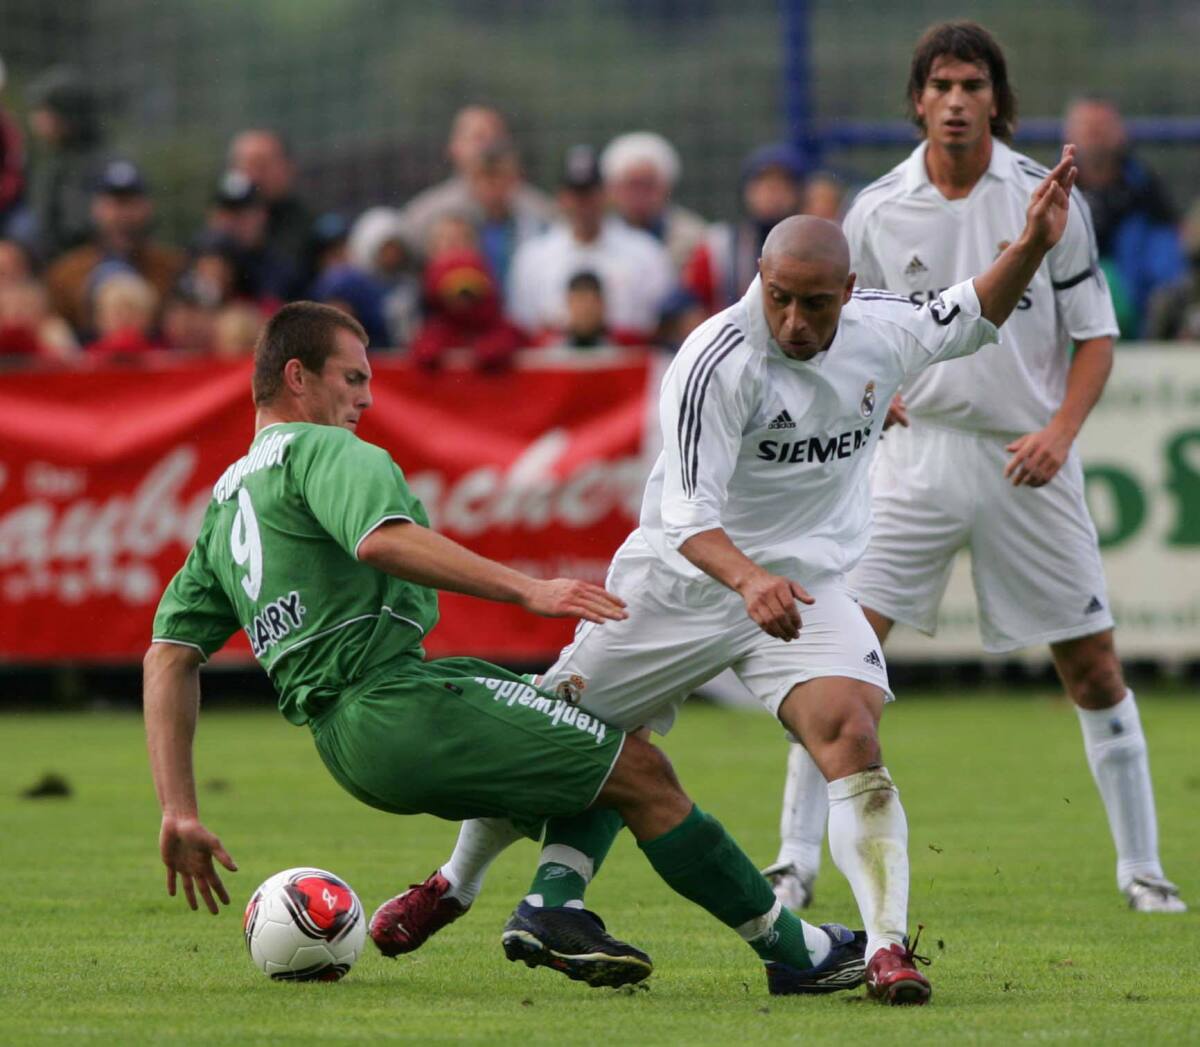 Roberto Carlos (Real) vies against Thomas Balta (Trenkwalder) during the training game at the training camp of Real Madrid in Irdning, Austria at the 7. August 2005. (Photo credit should read JOE KLAMAR/AFP/Getty Images) ORG XMIT: 1025